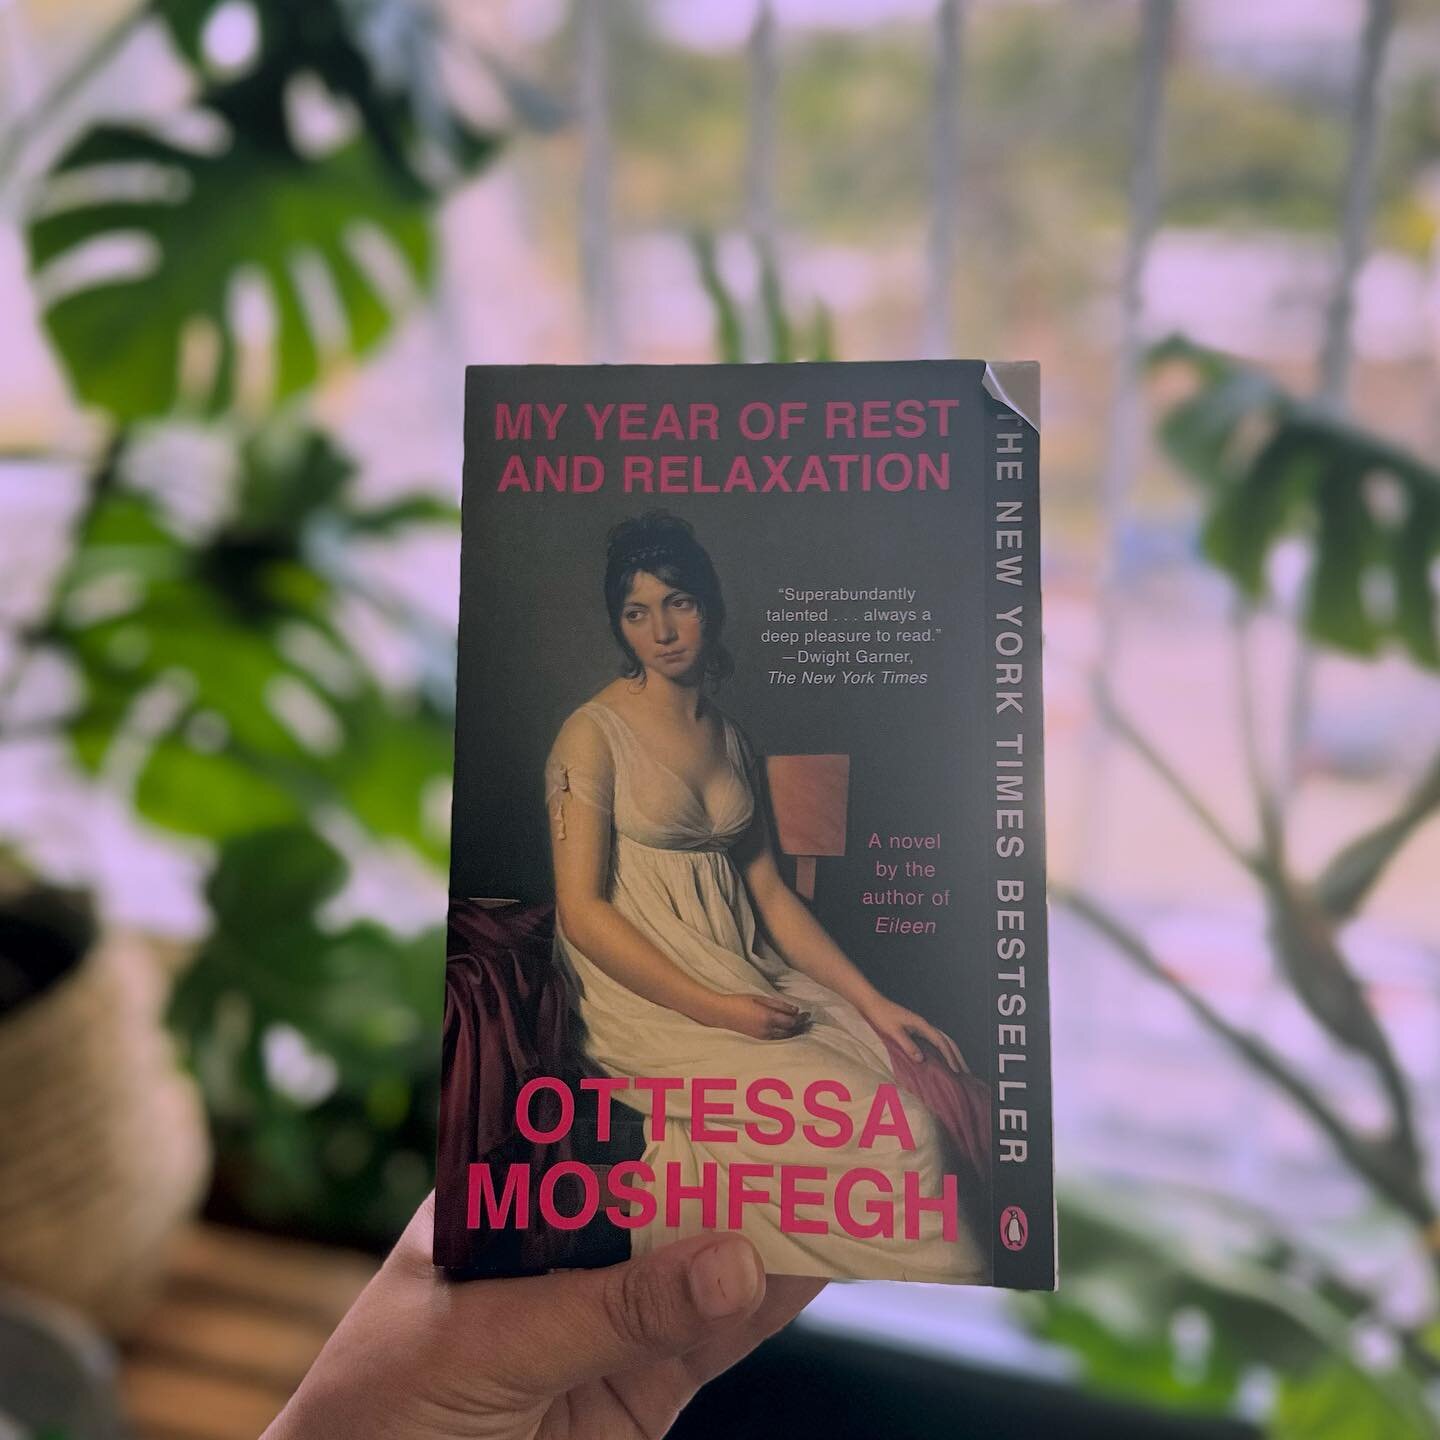 𝓑𝓸𝓸𝓴 𝓡𝓮𝓿𝓲𝓮𝔀 MY YEAR OF REST AND RELAXATION: What a ride. This book was NOT what I was expecting, and I was thrilled by it. The cover and title always intrigued me, but I didn&rsquo;t know much about it. I assumed a period piece from those t